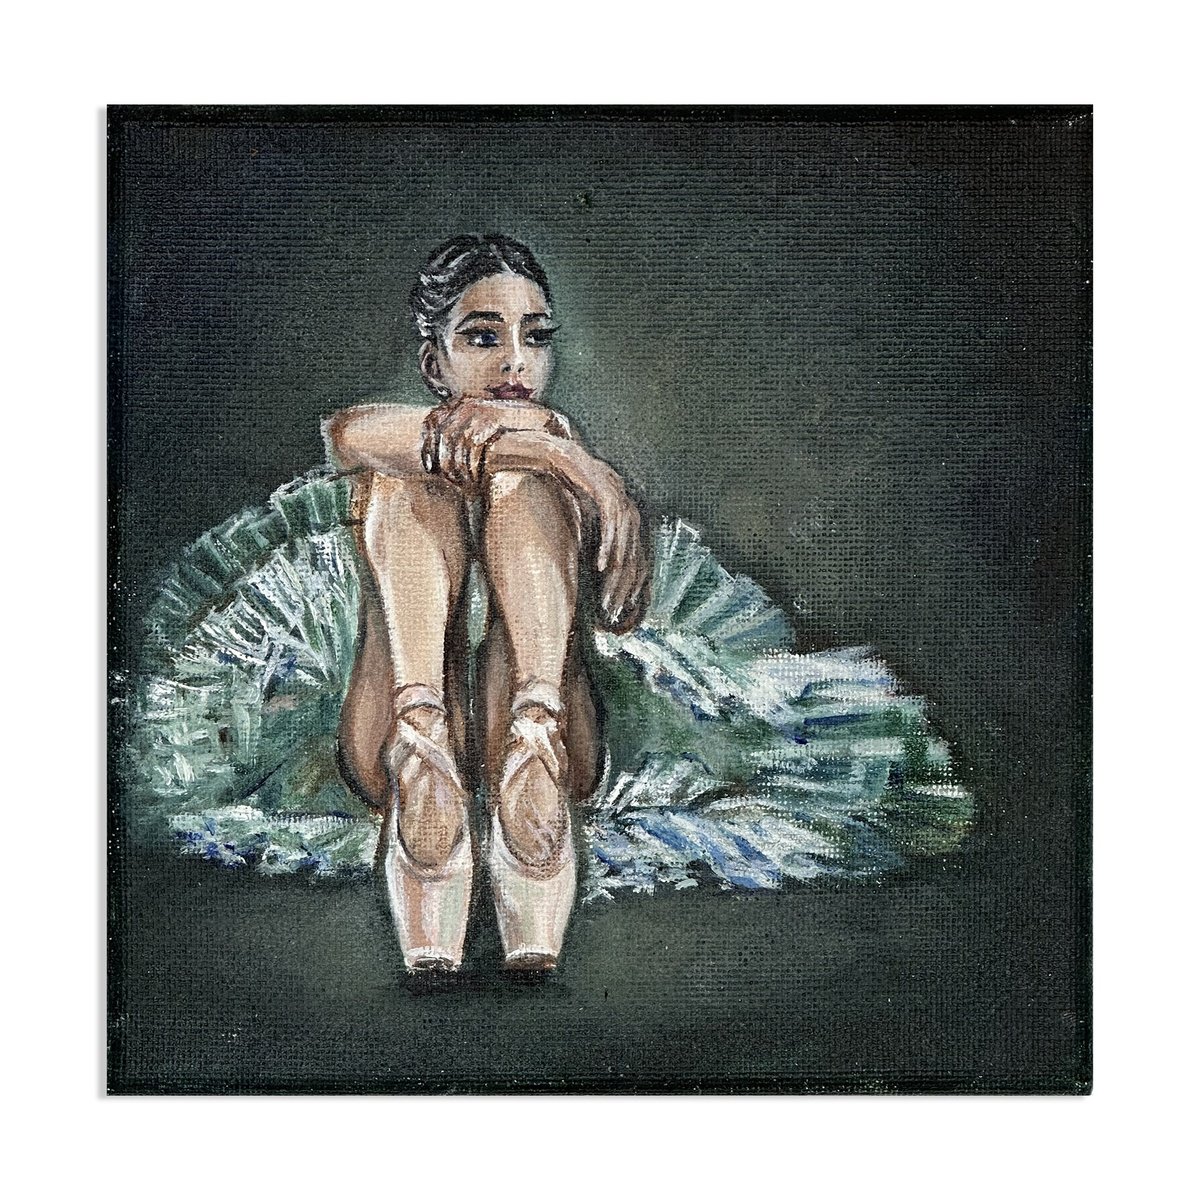 Ballerina 3 | Dance and art synergy by VICTO